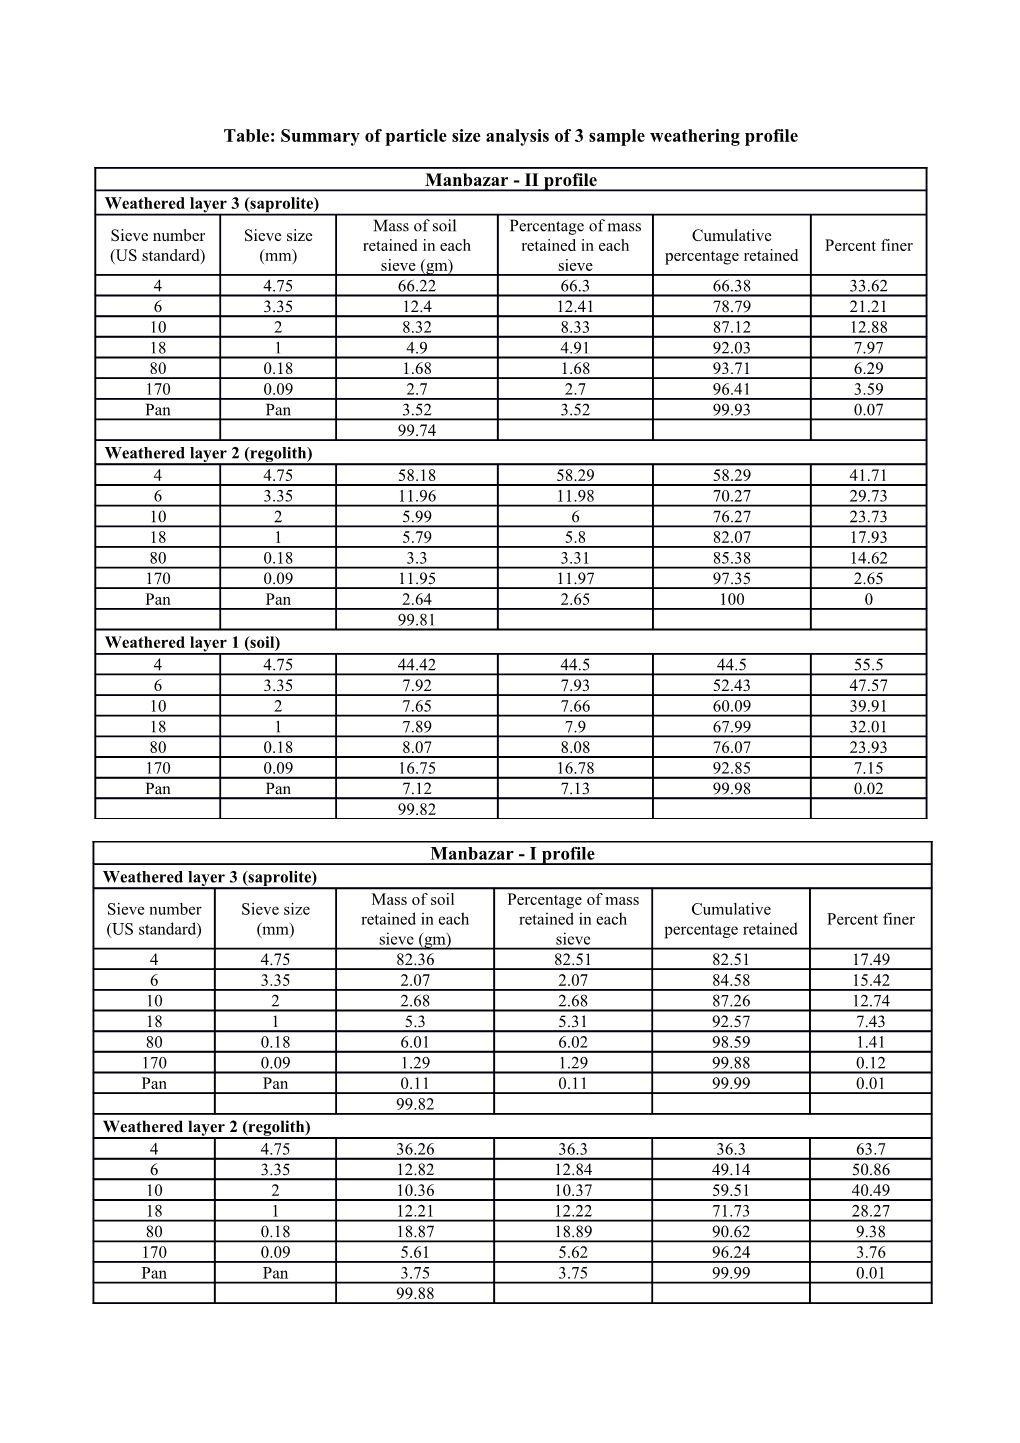 Table: Summary of Particle Size Analysis of 3 Sample Weathering Profile